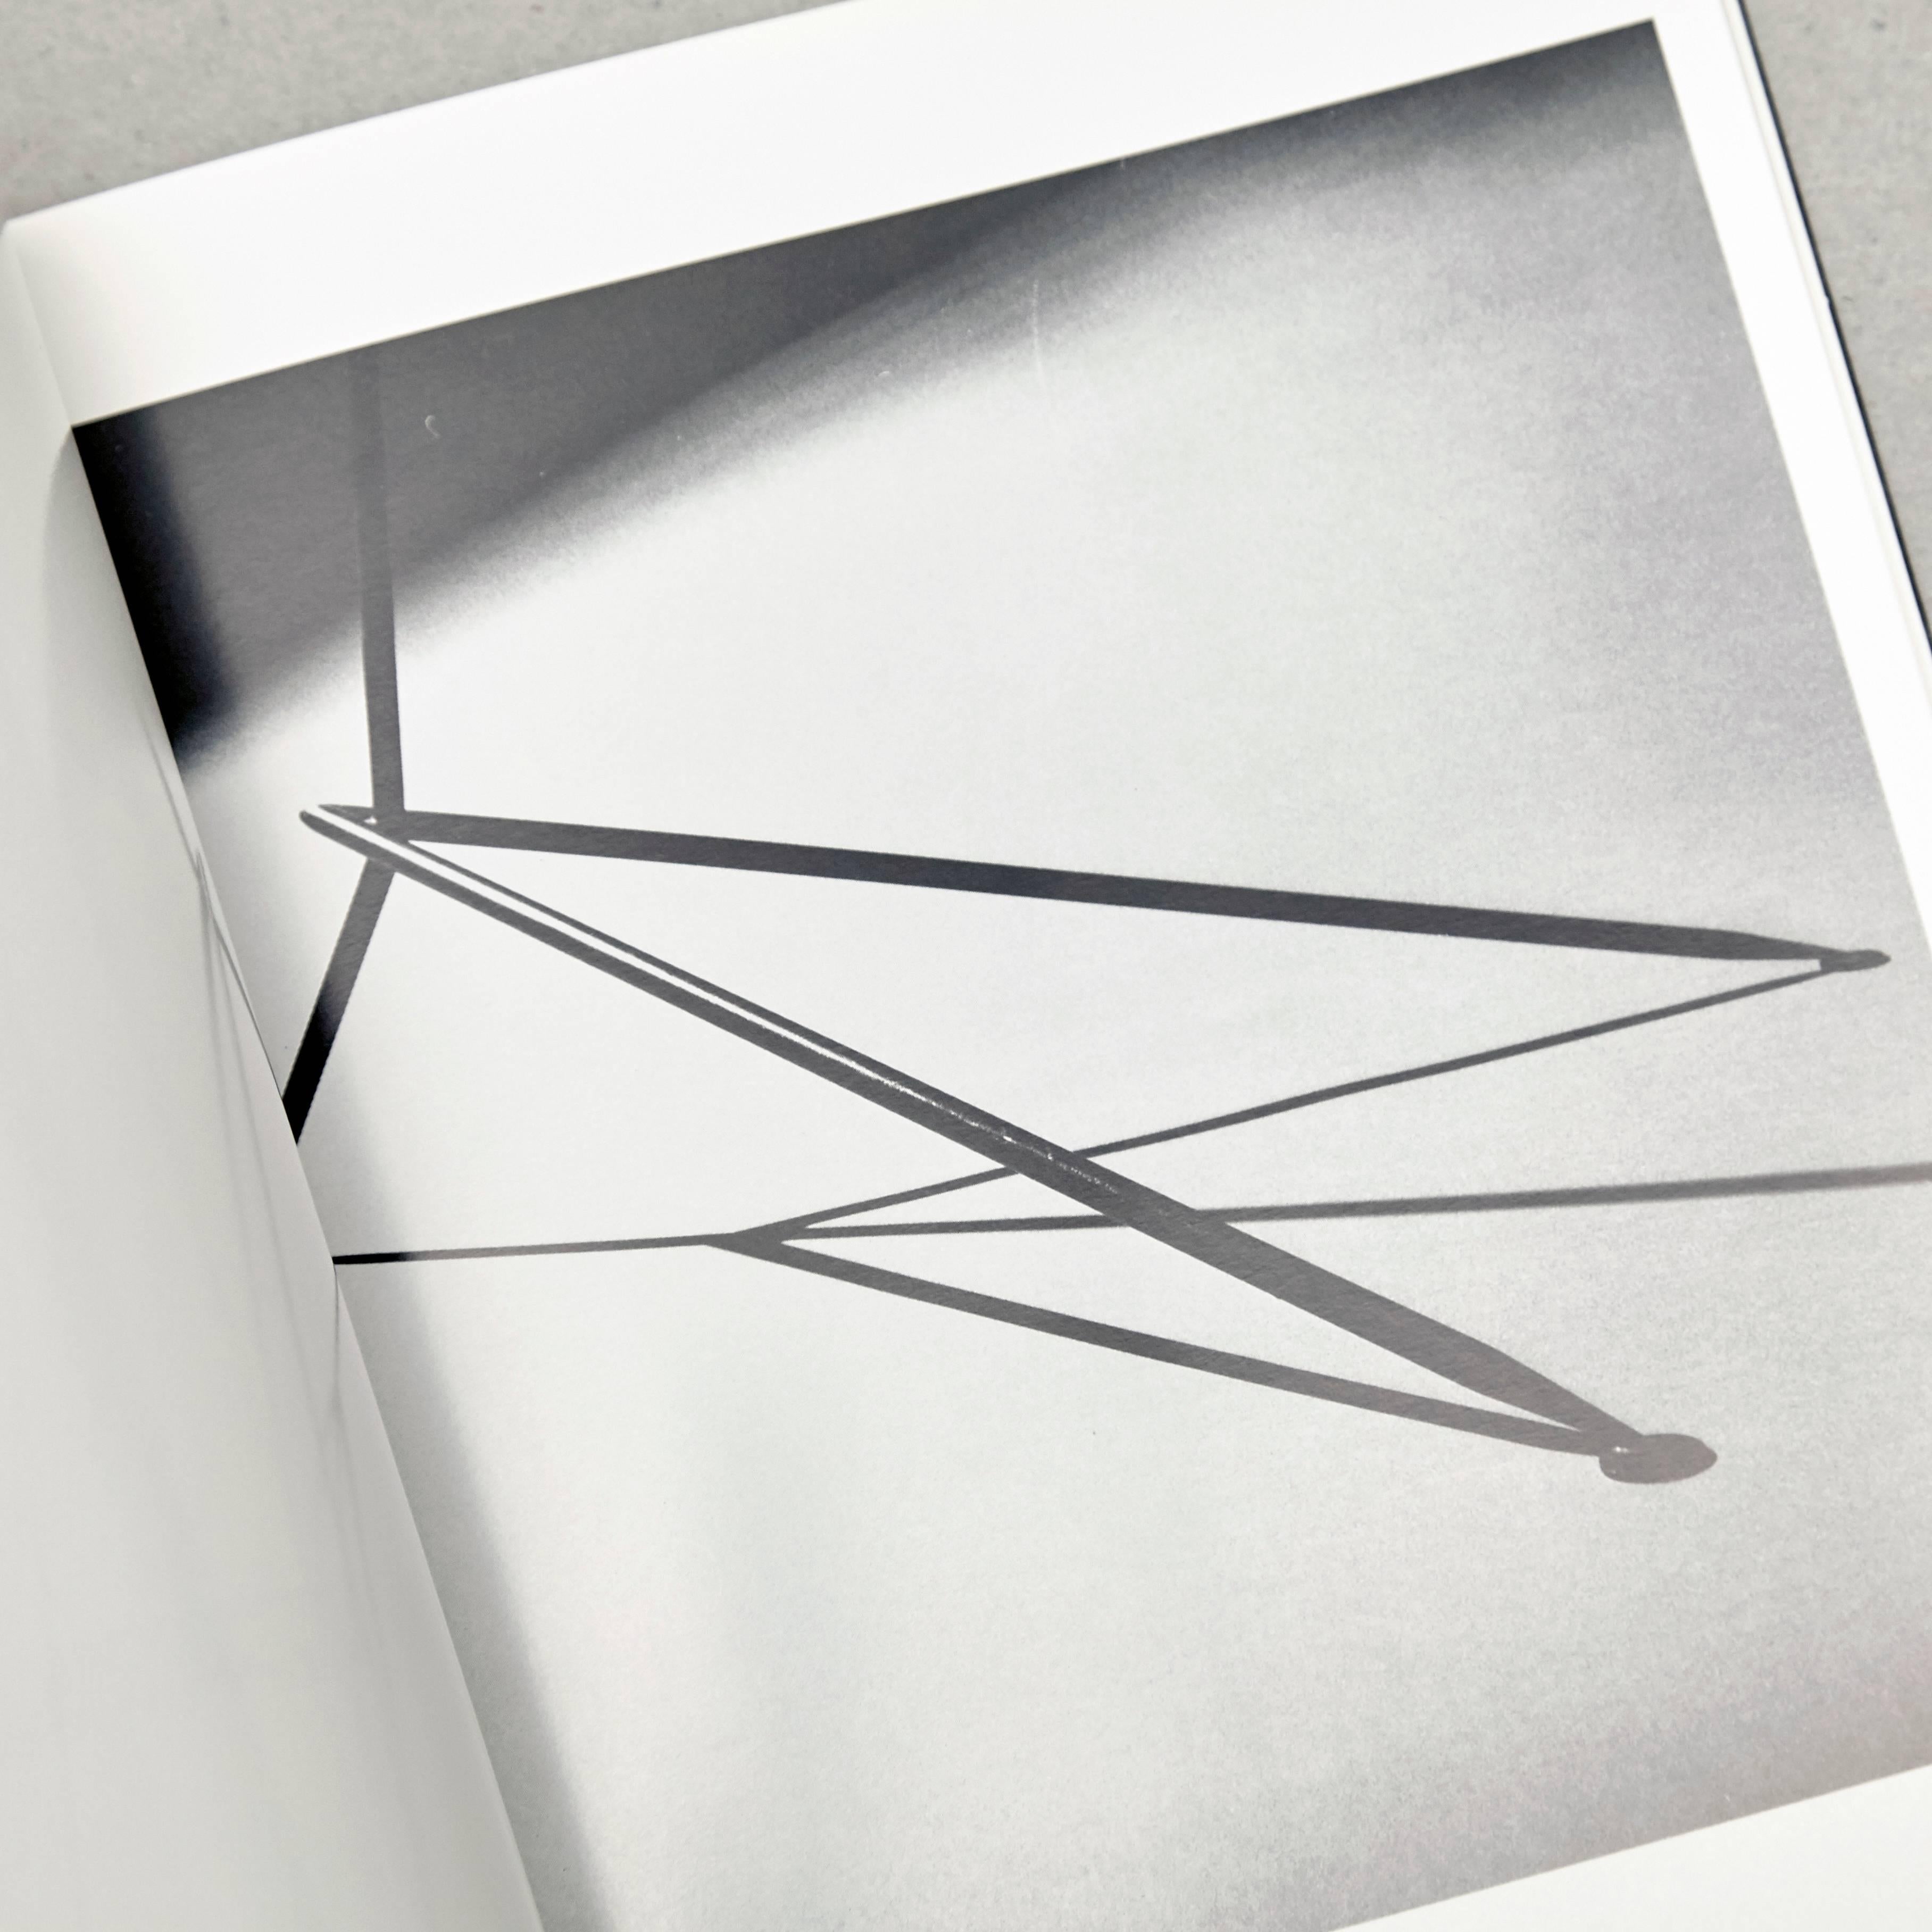 Serge Mouille Luminaires Book 